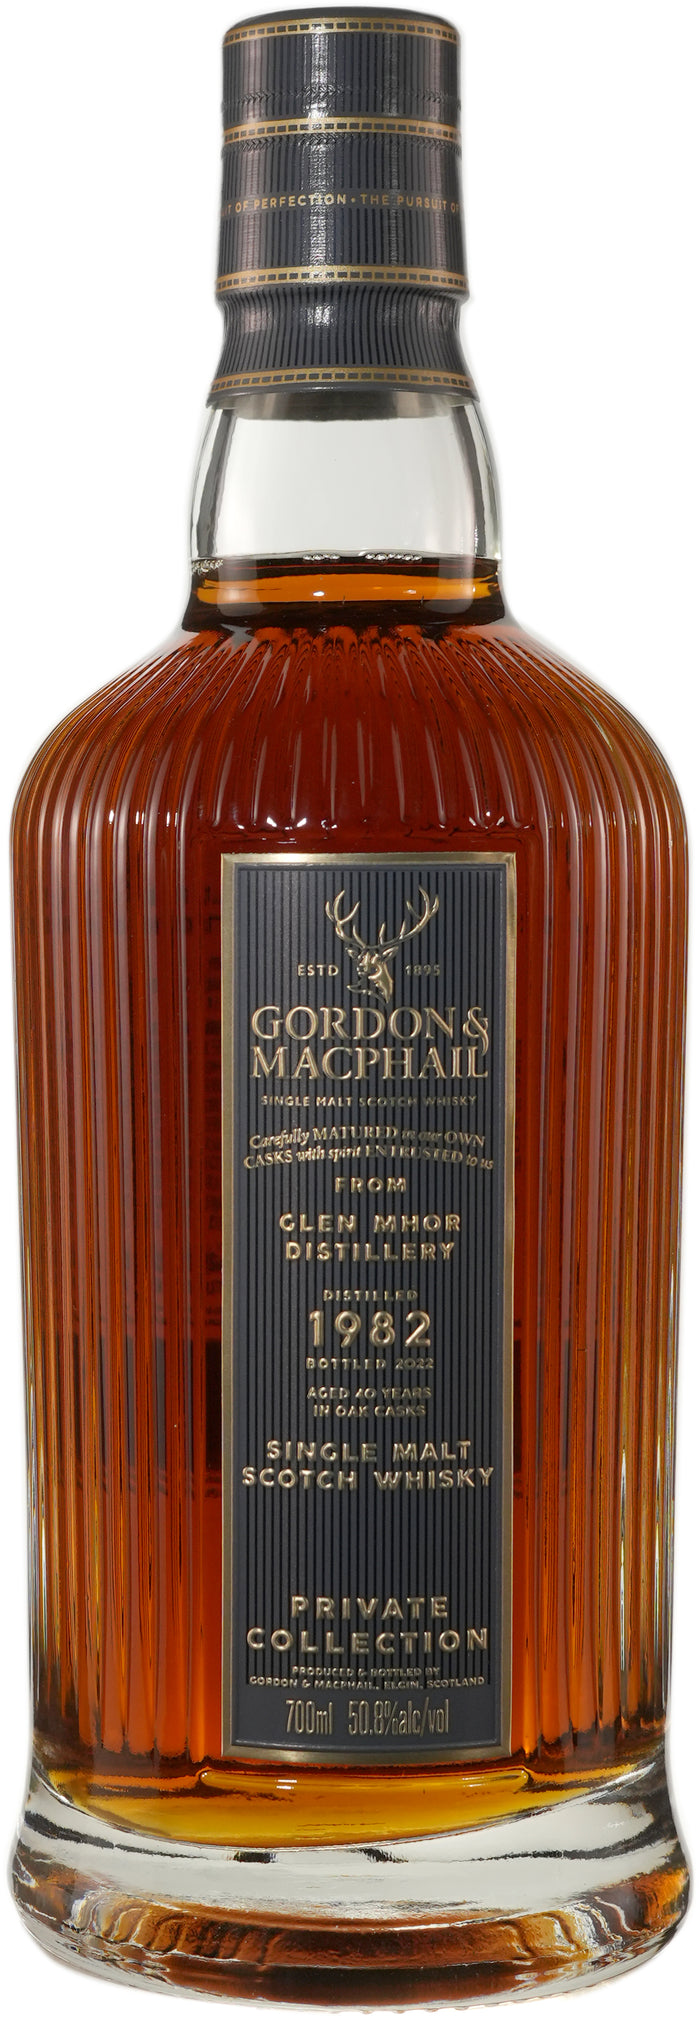 Gordon & Macphail Glen Mhor 40 Year Old Private Collection 1982 Scotch Whisky